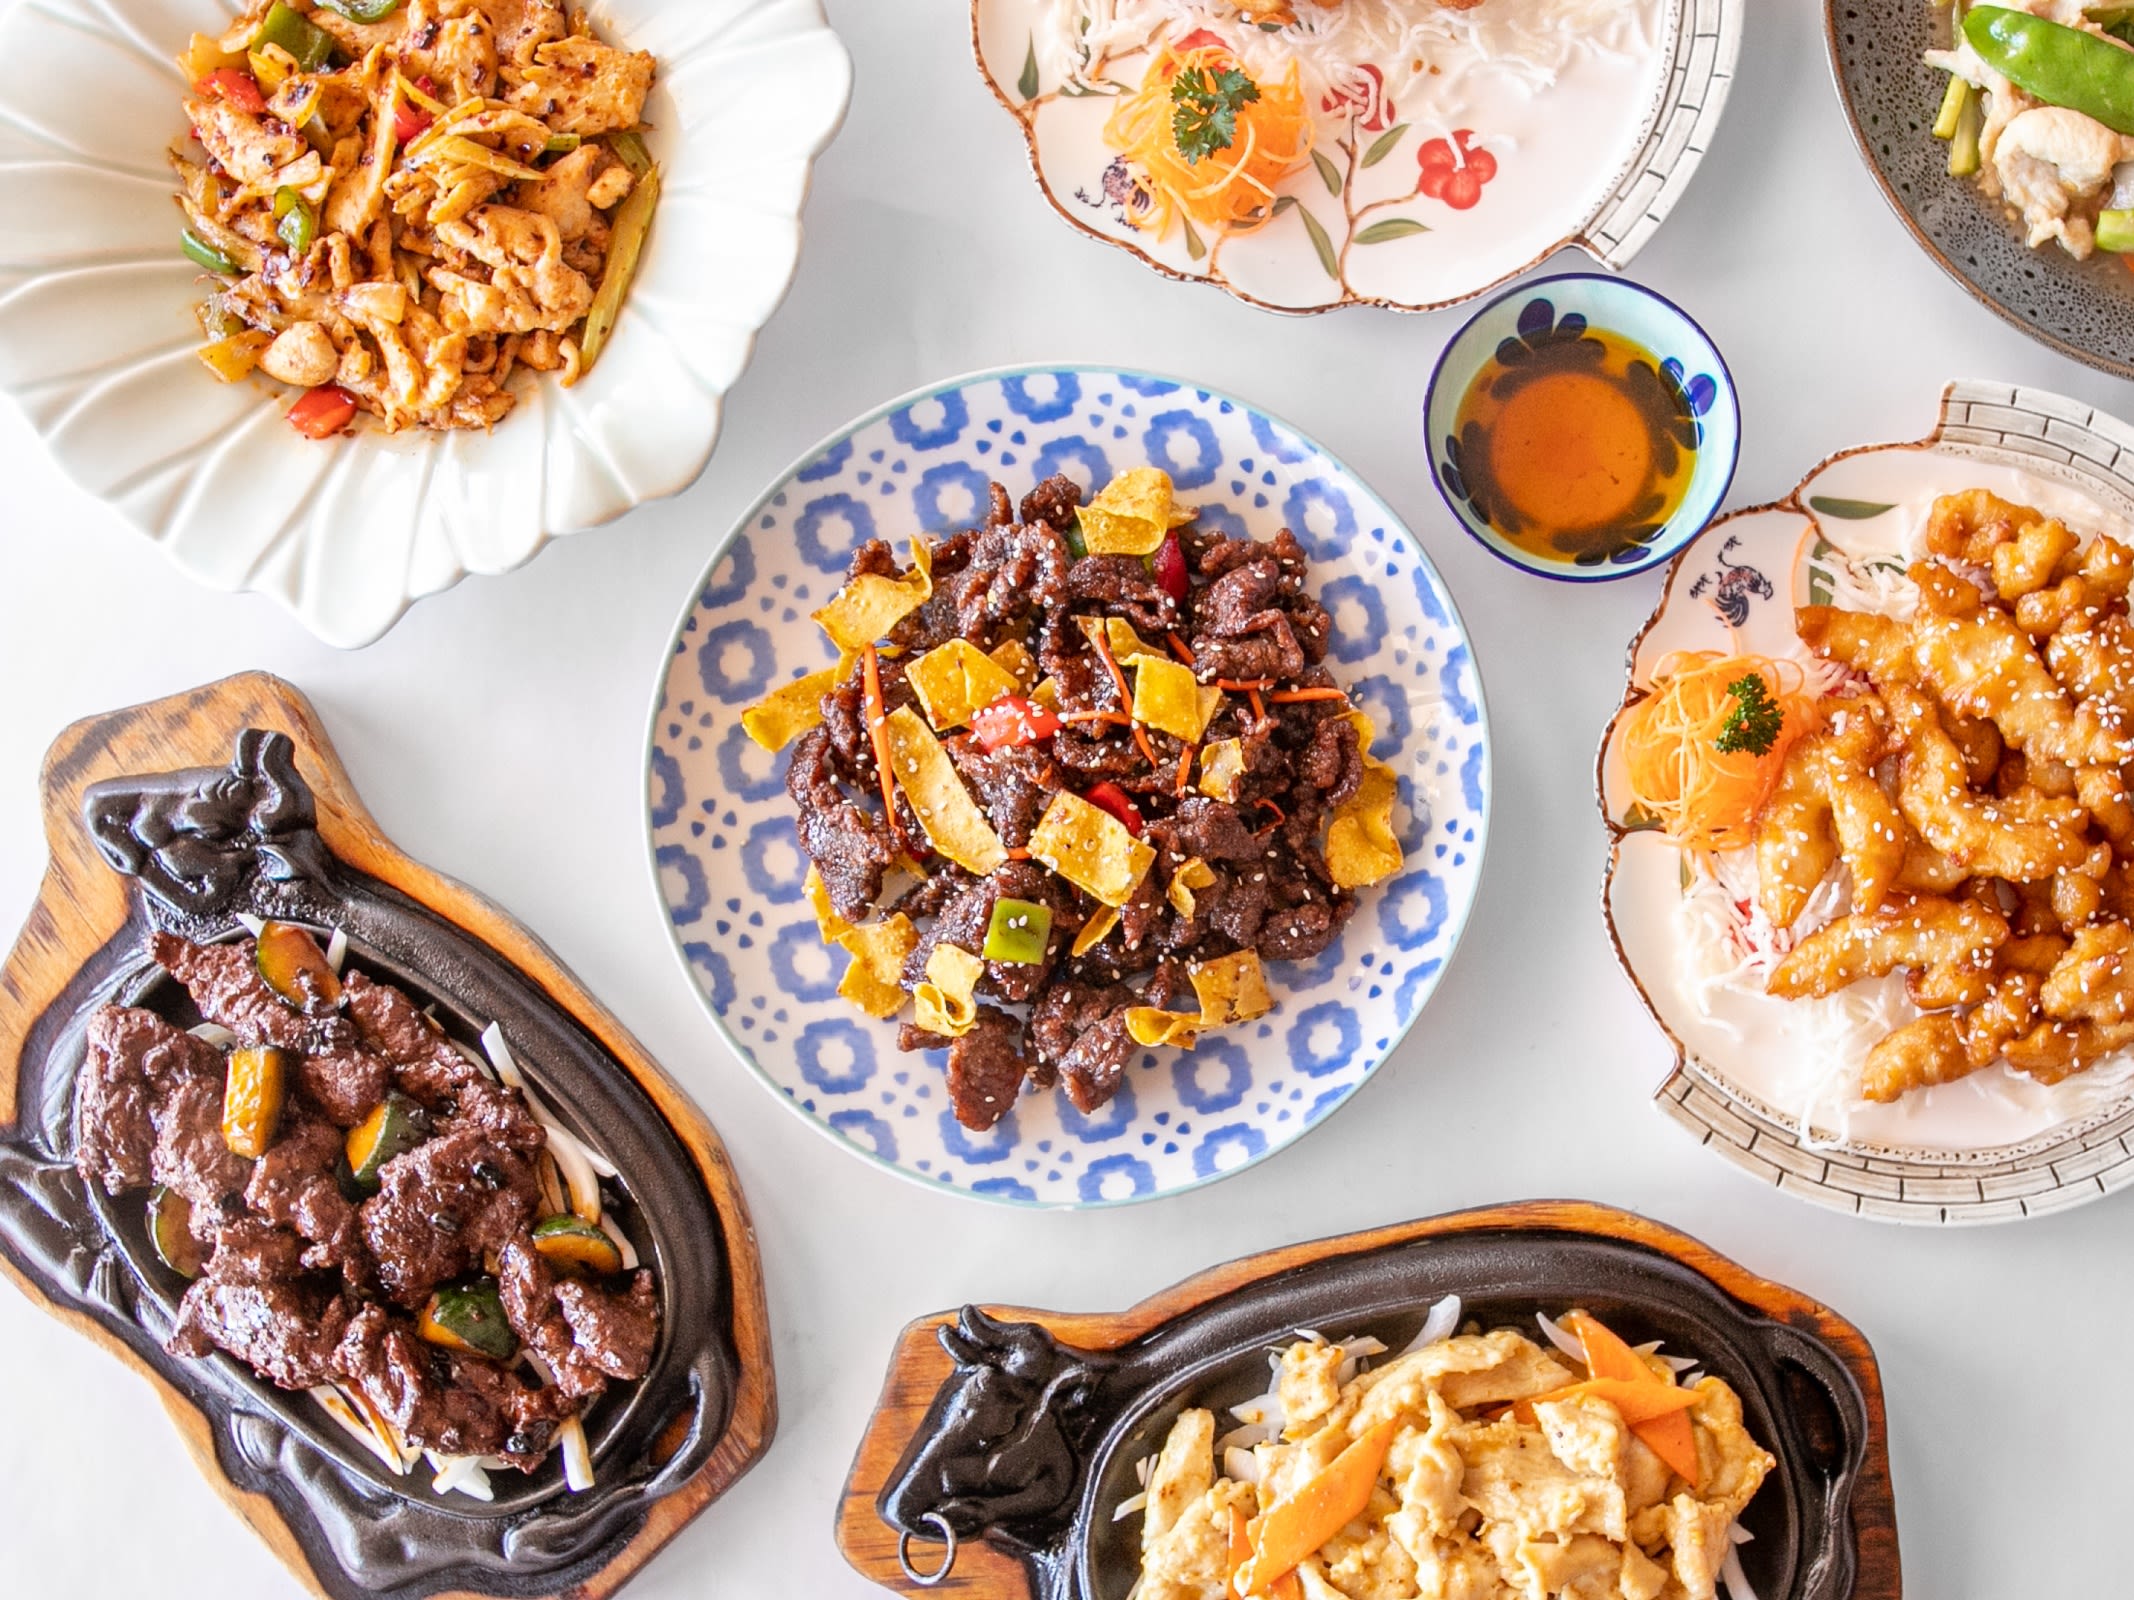 Chinese Food Near Me Chinese Takeaways and Restaurants Delivering Near Me | Order from Just Eat